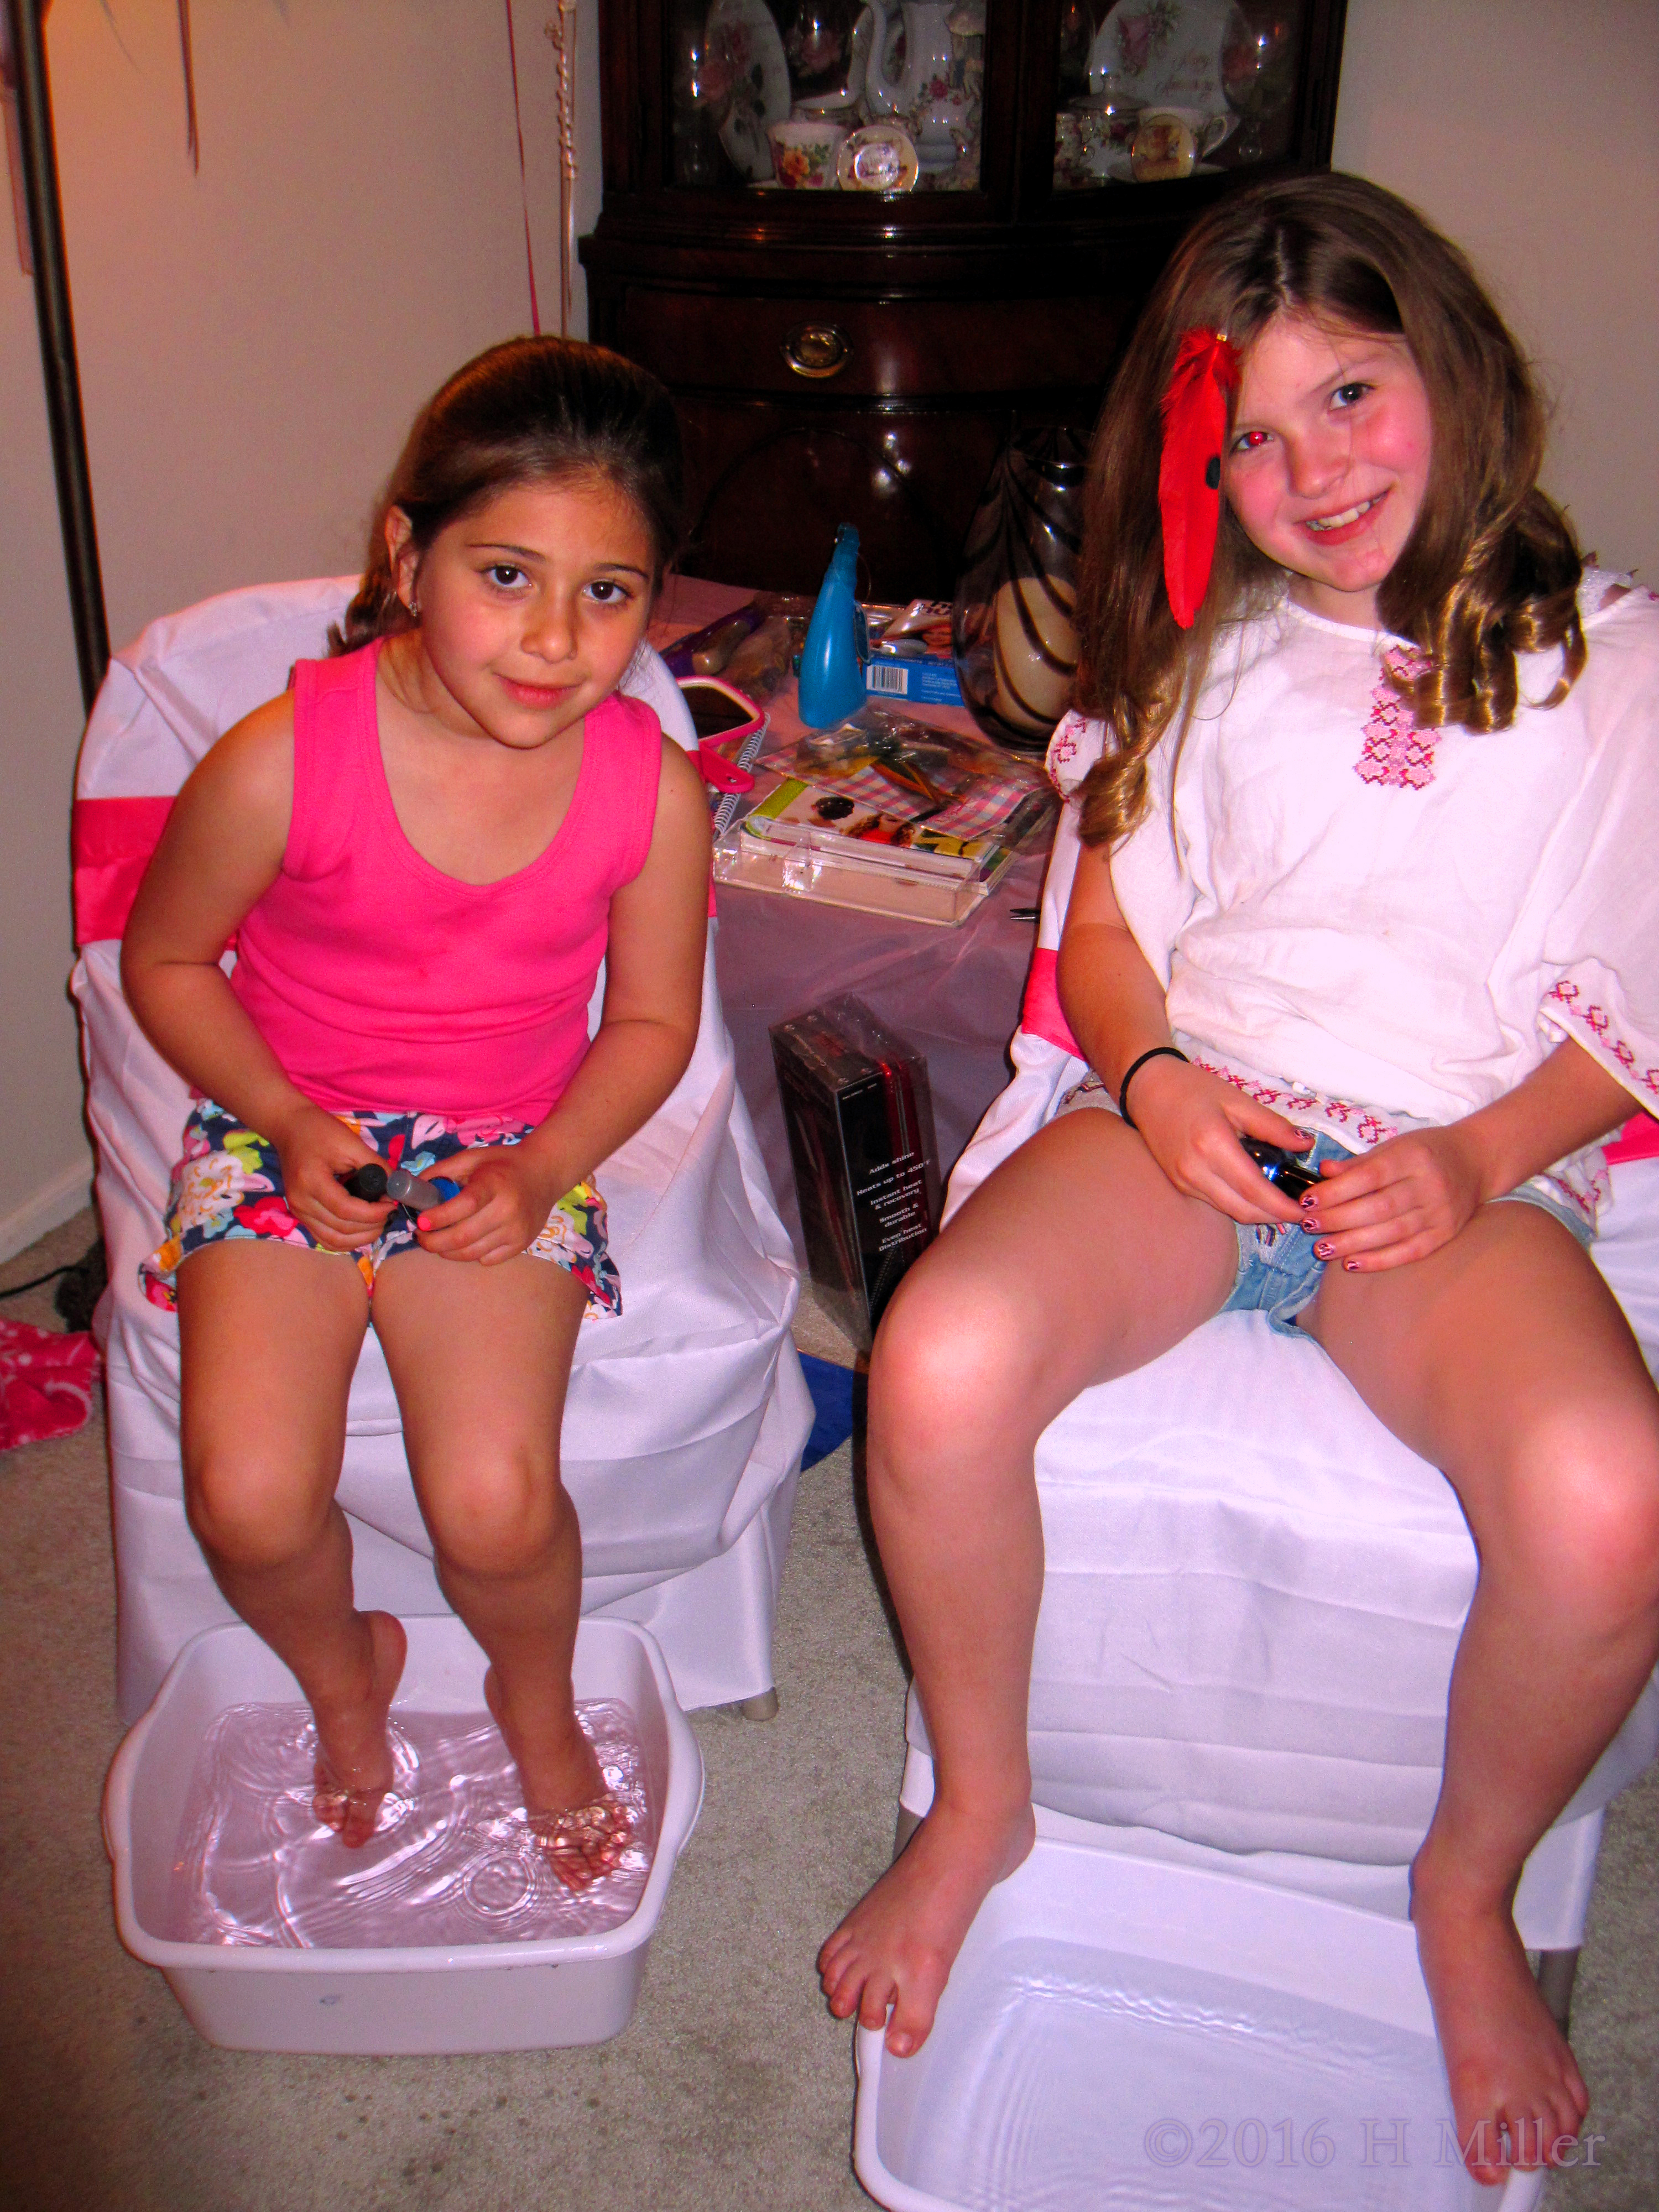 Pedicures Are So Much Fun With Friends! 